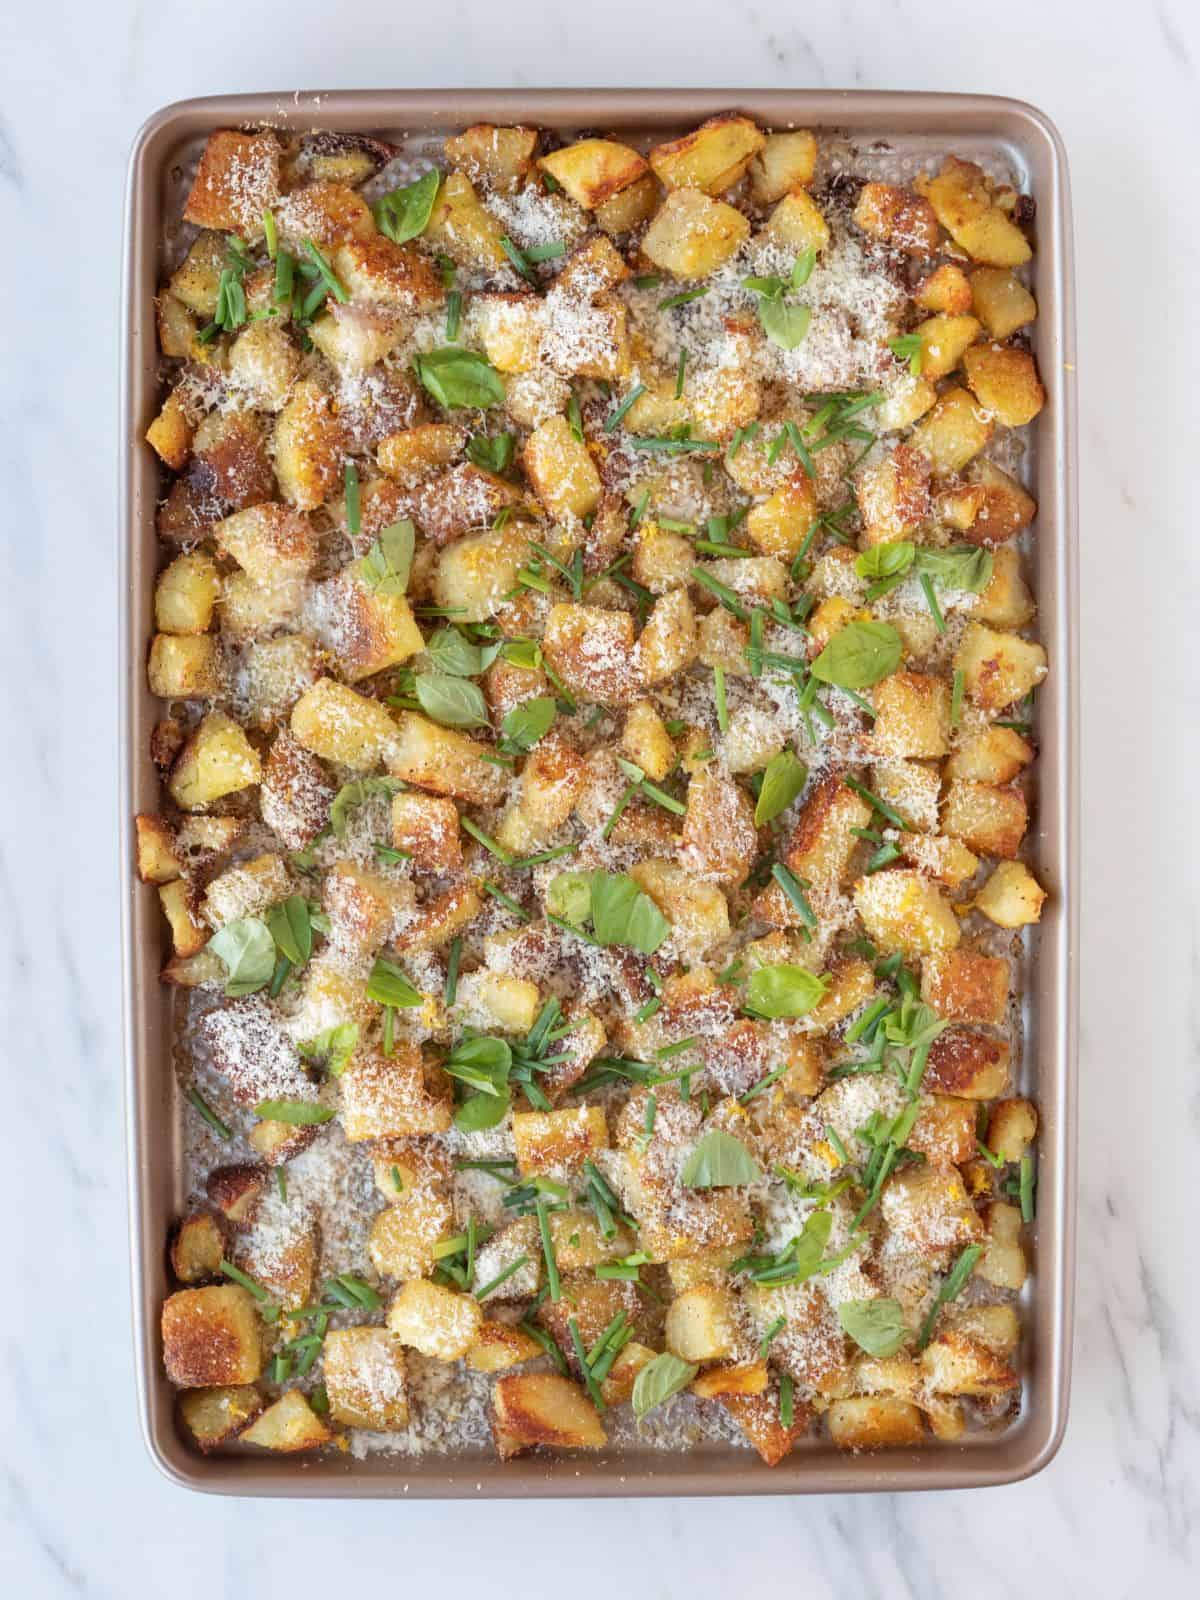 A baking sheet with roasted cubed potatoes, topped with herbs and cheese.